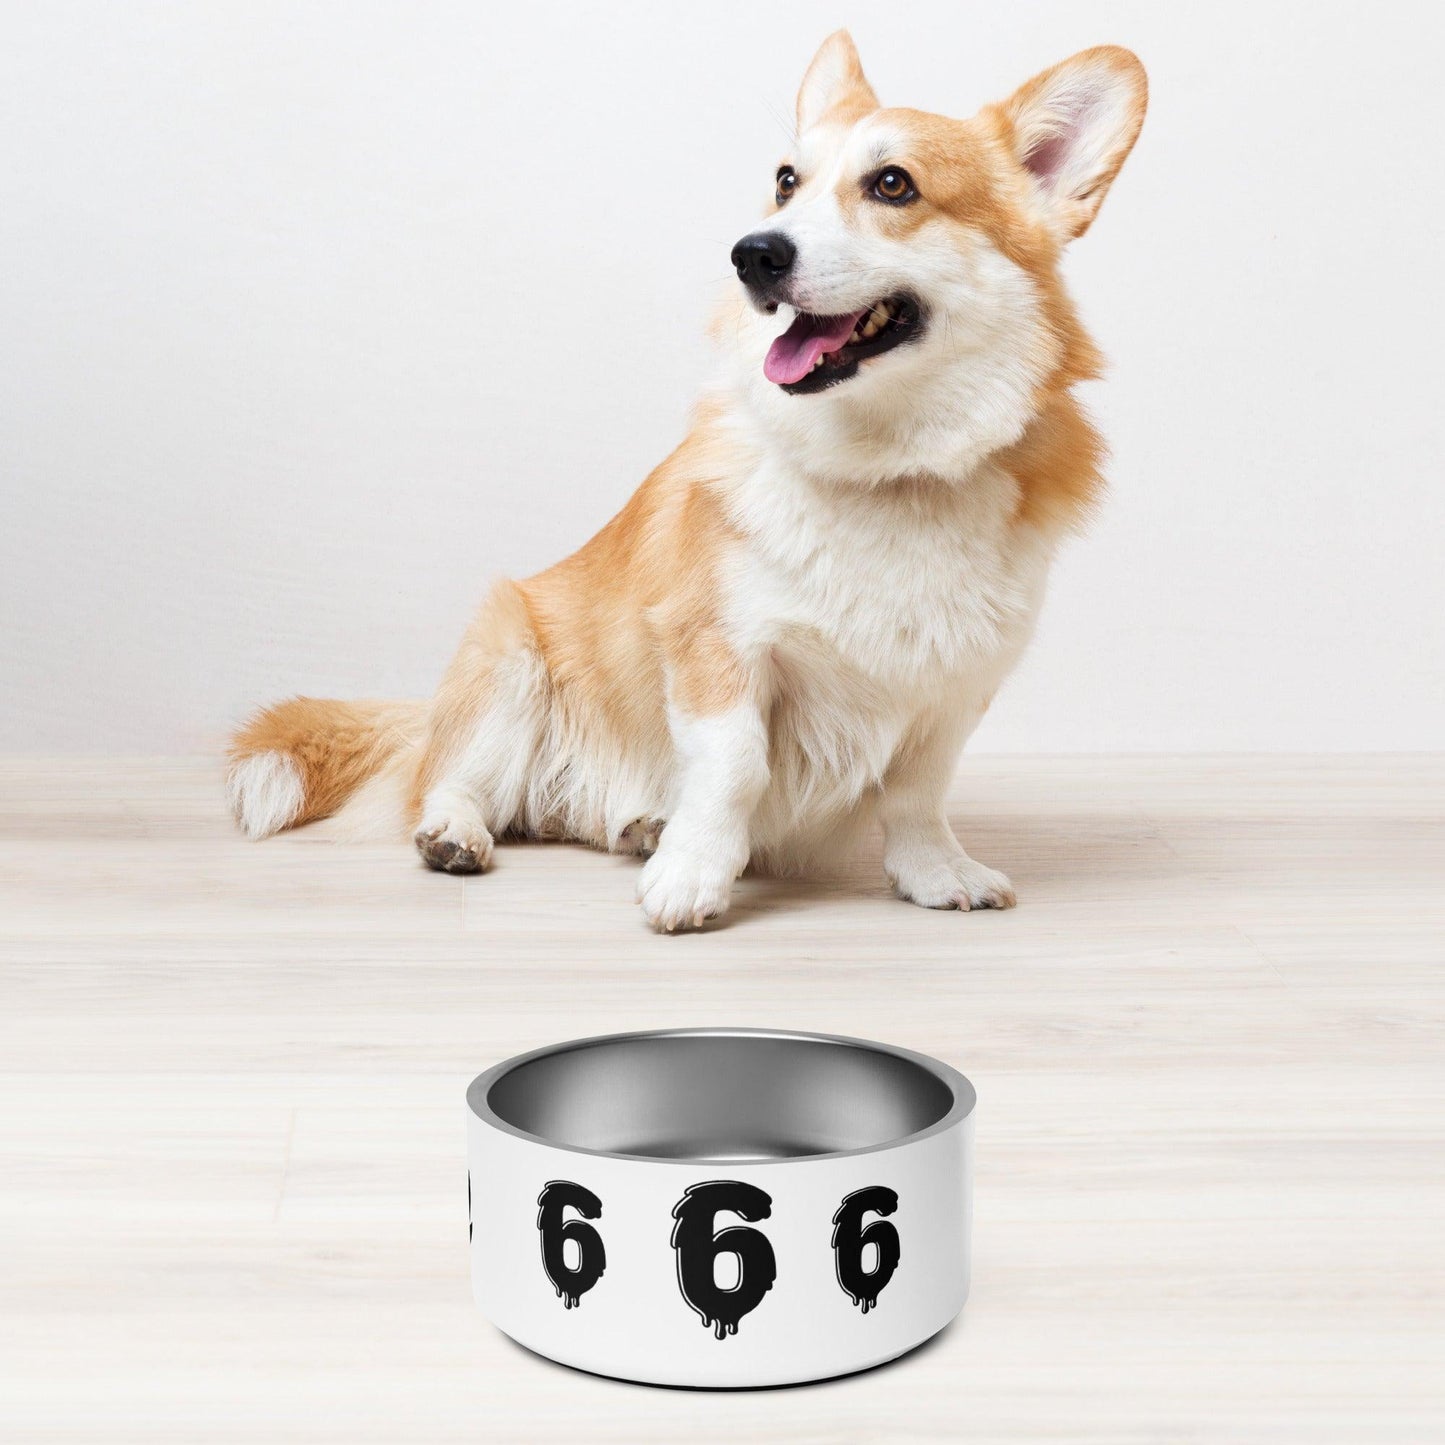 White 666 Rock Evil Sign Pet Bowl For Your Demented Dogs and Cats - Lizard Vigilante